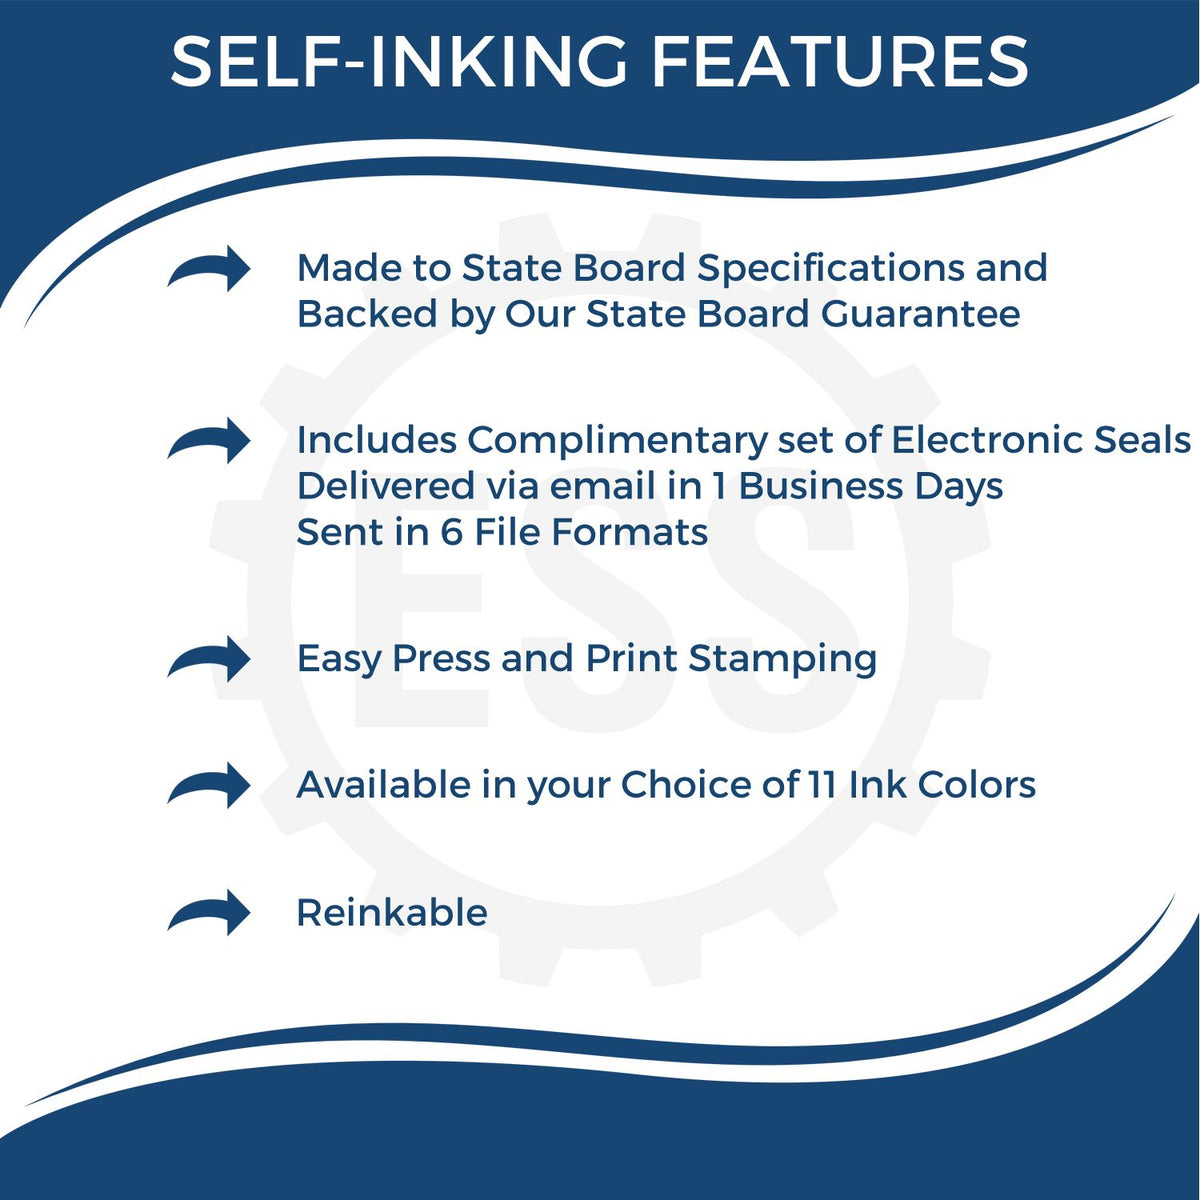 A picture of an infographic highlighting the selling points for the Self-Inking New Jersey Geologist Stamp